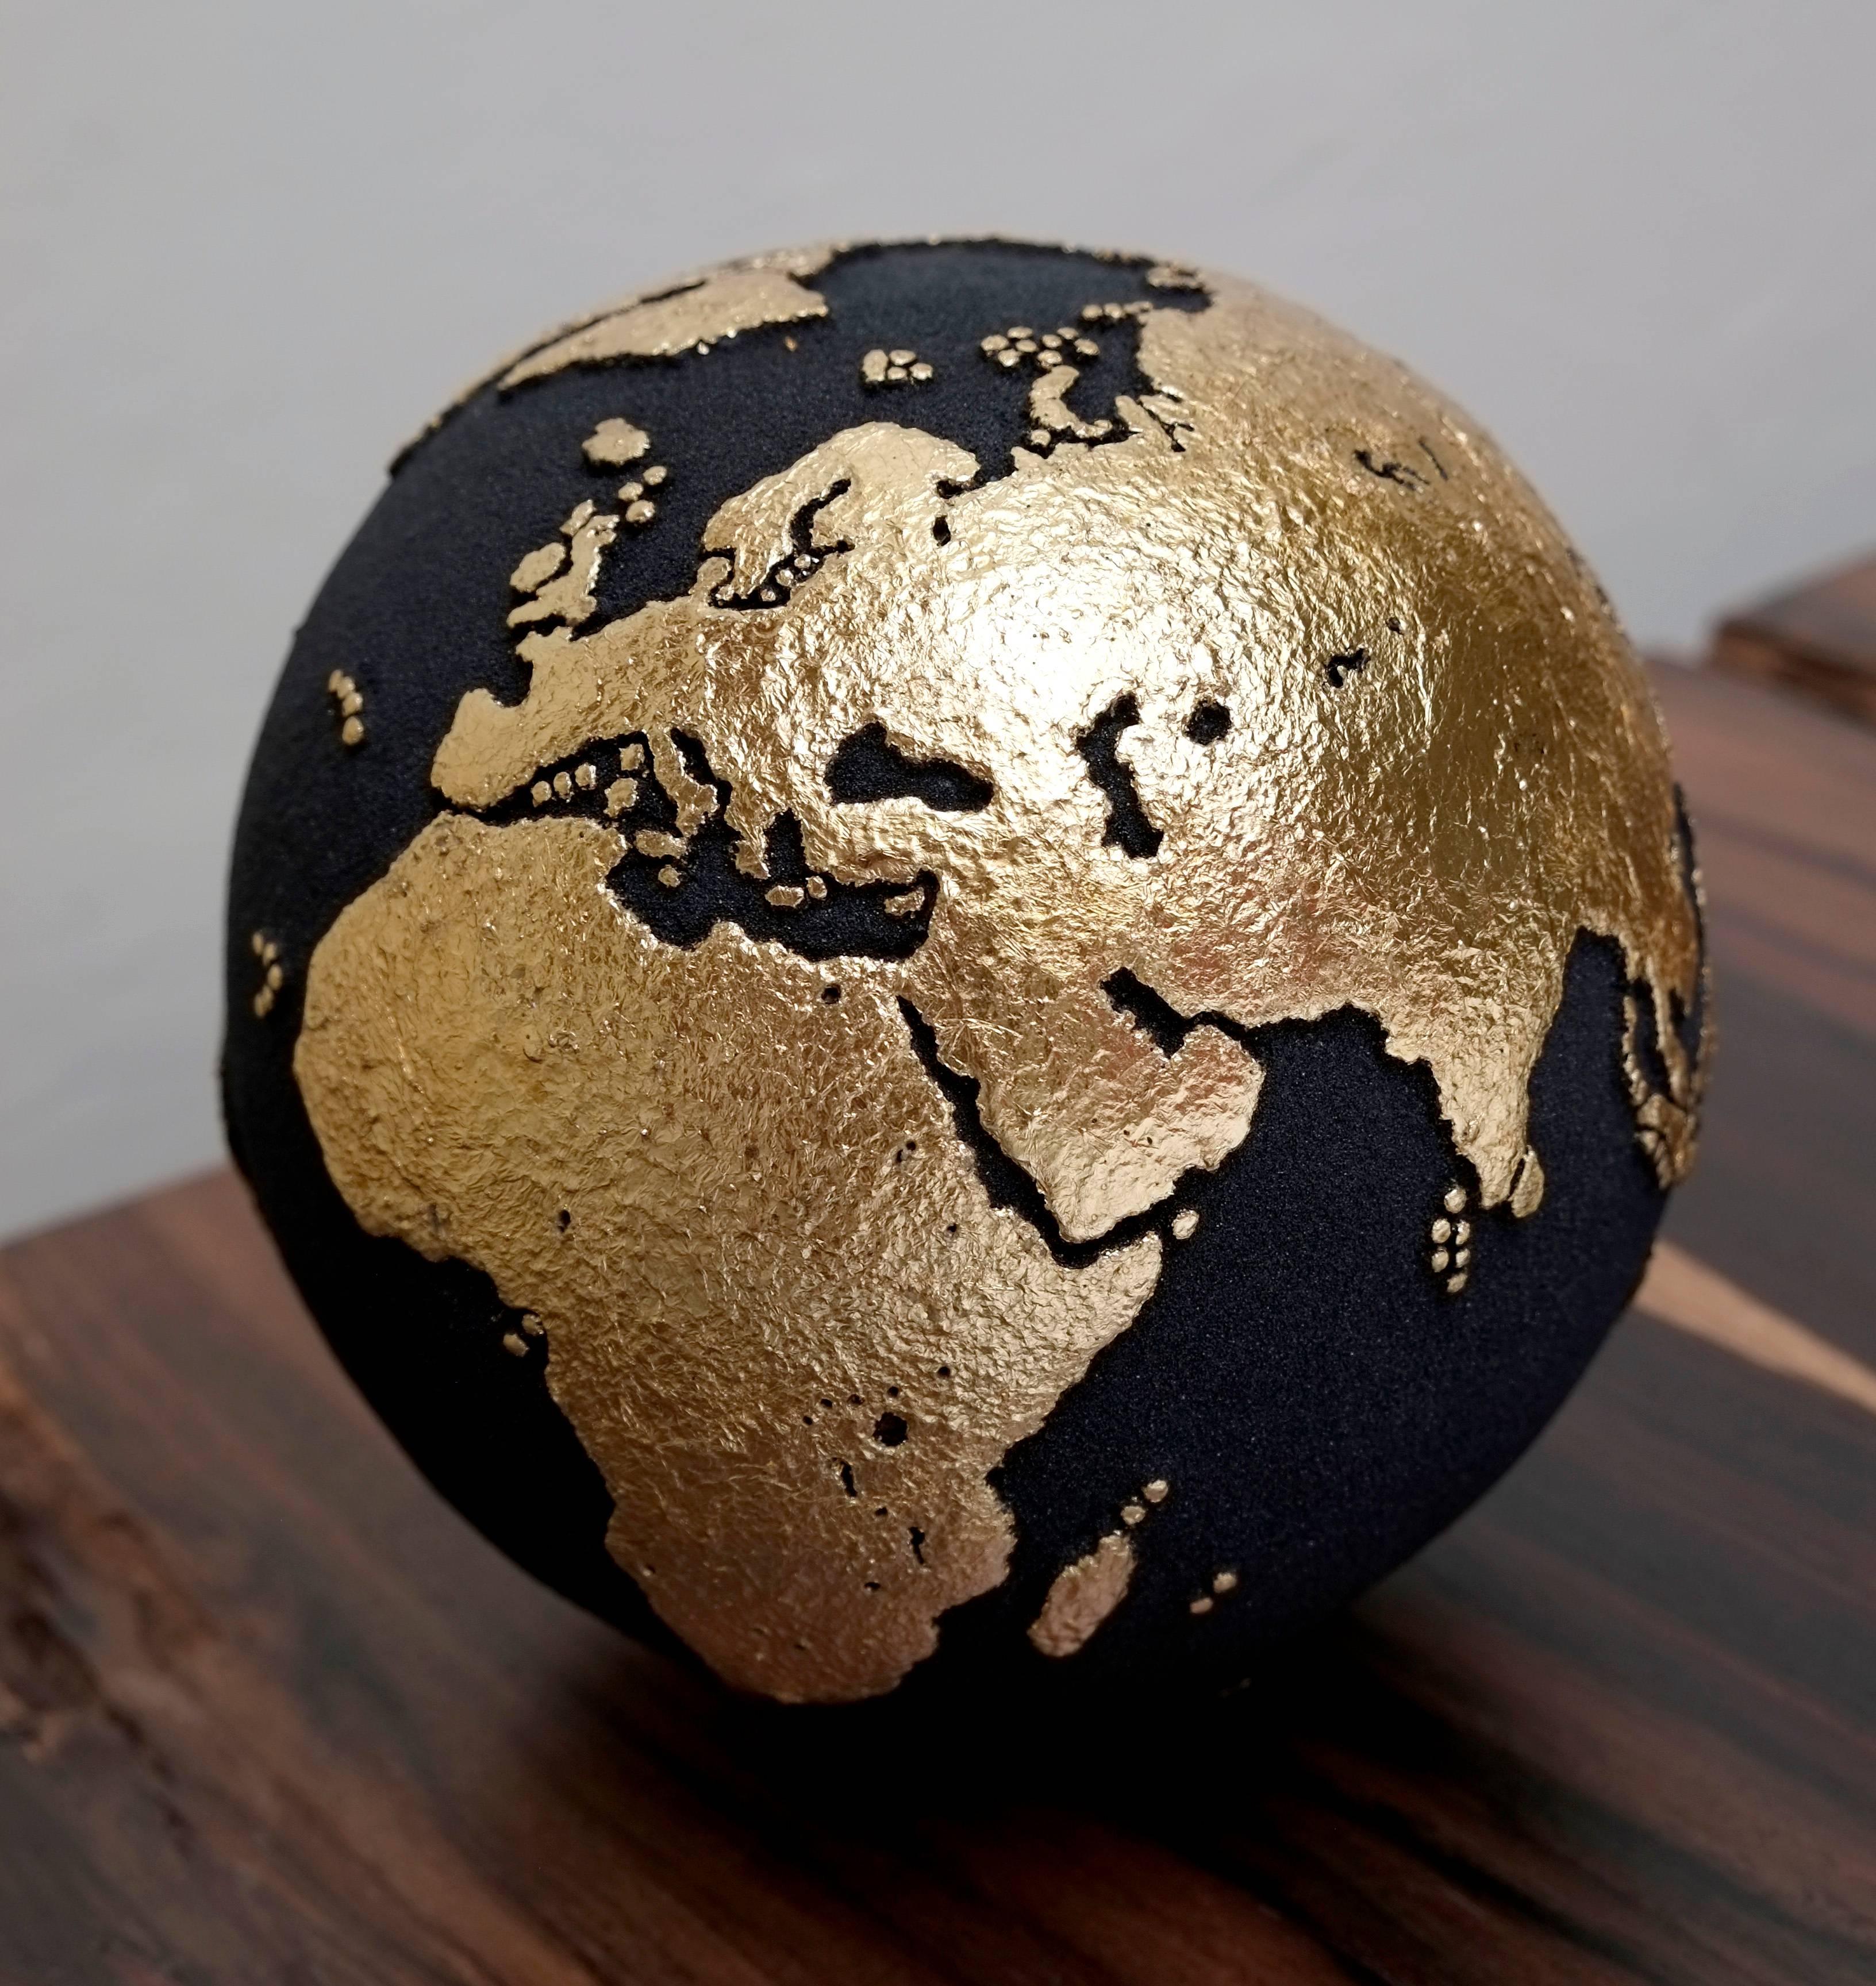 Say it with gold.

Adorable little handcrafted wooden globe made of teak root and volcanic sand, with 23-carat gold leaf finishing. A certainly ideal piece as gifts for friends, loved ones, or for yourself.

Dimension: 7.87 in / 20 cm
Materials: